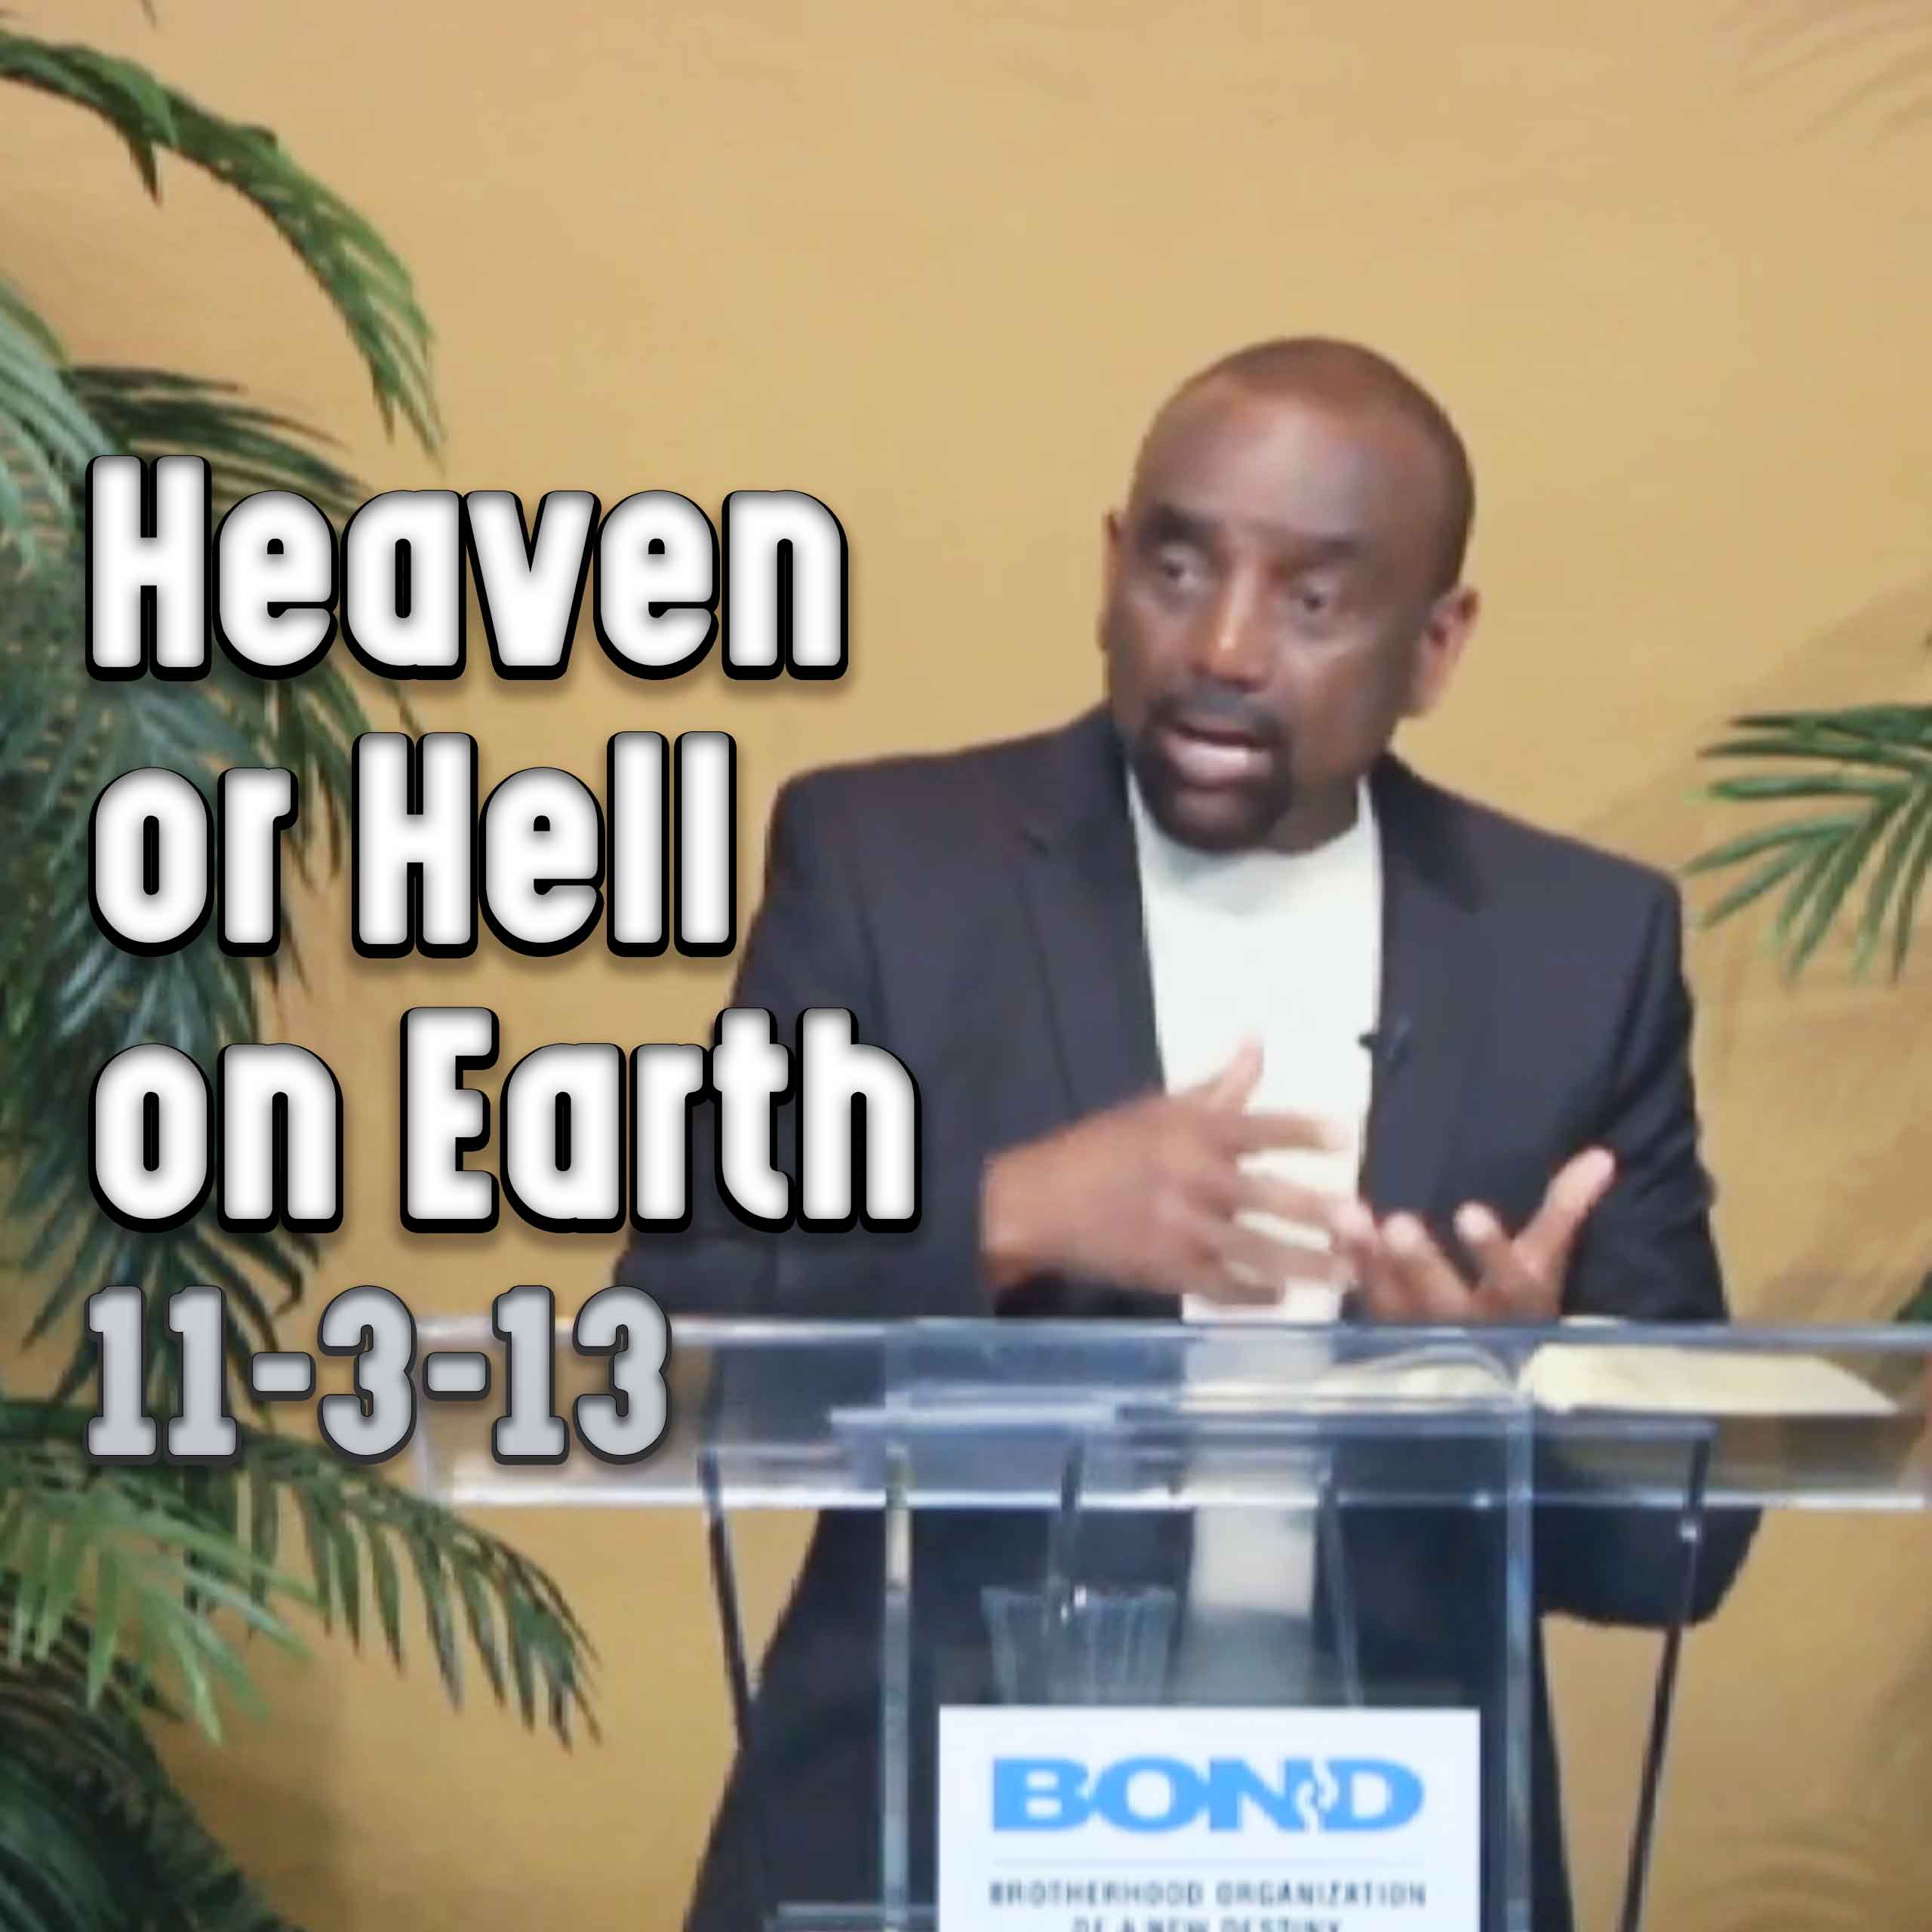 Heaven or Hell on Earth: Sunday Service Nov 3, 2013